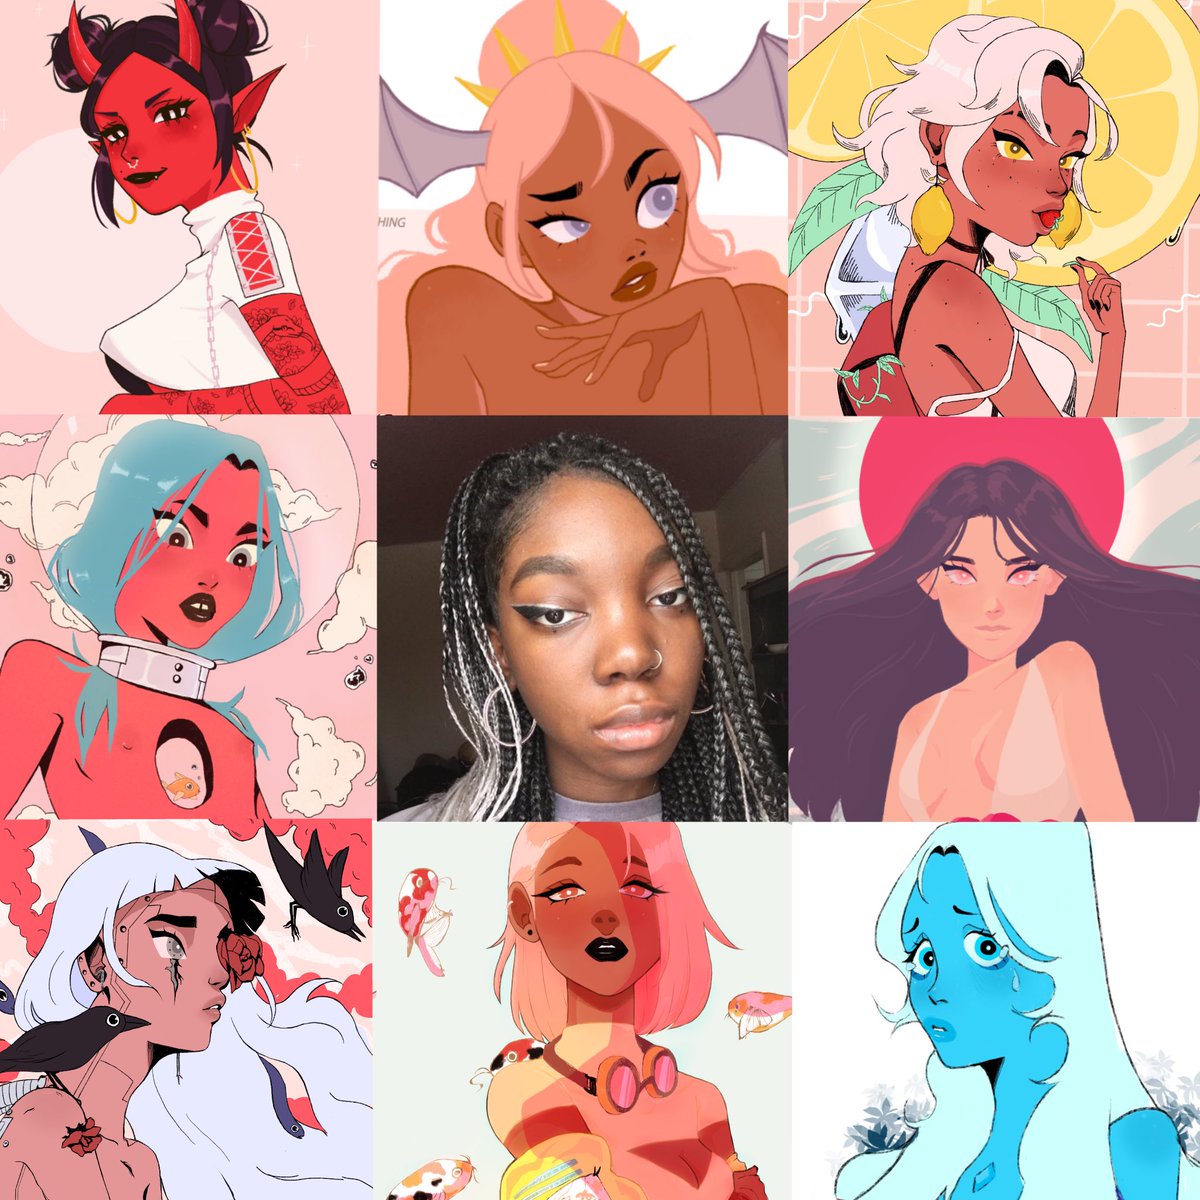 hopping on this wave #artvsartist 